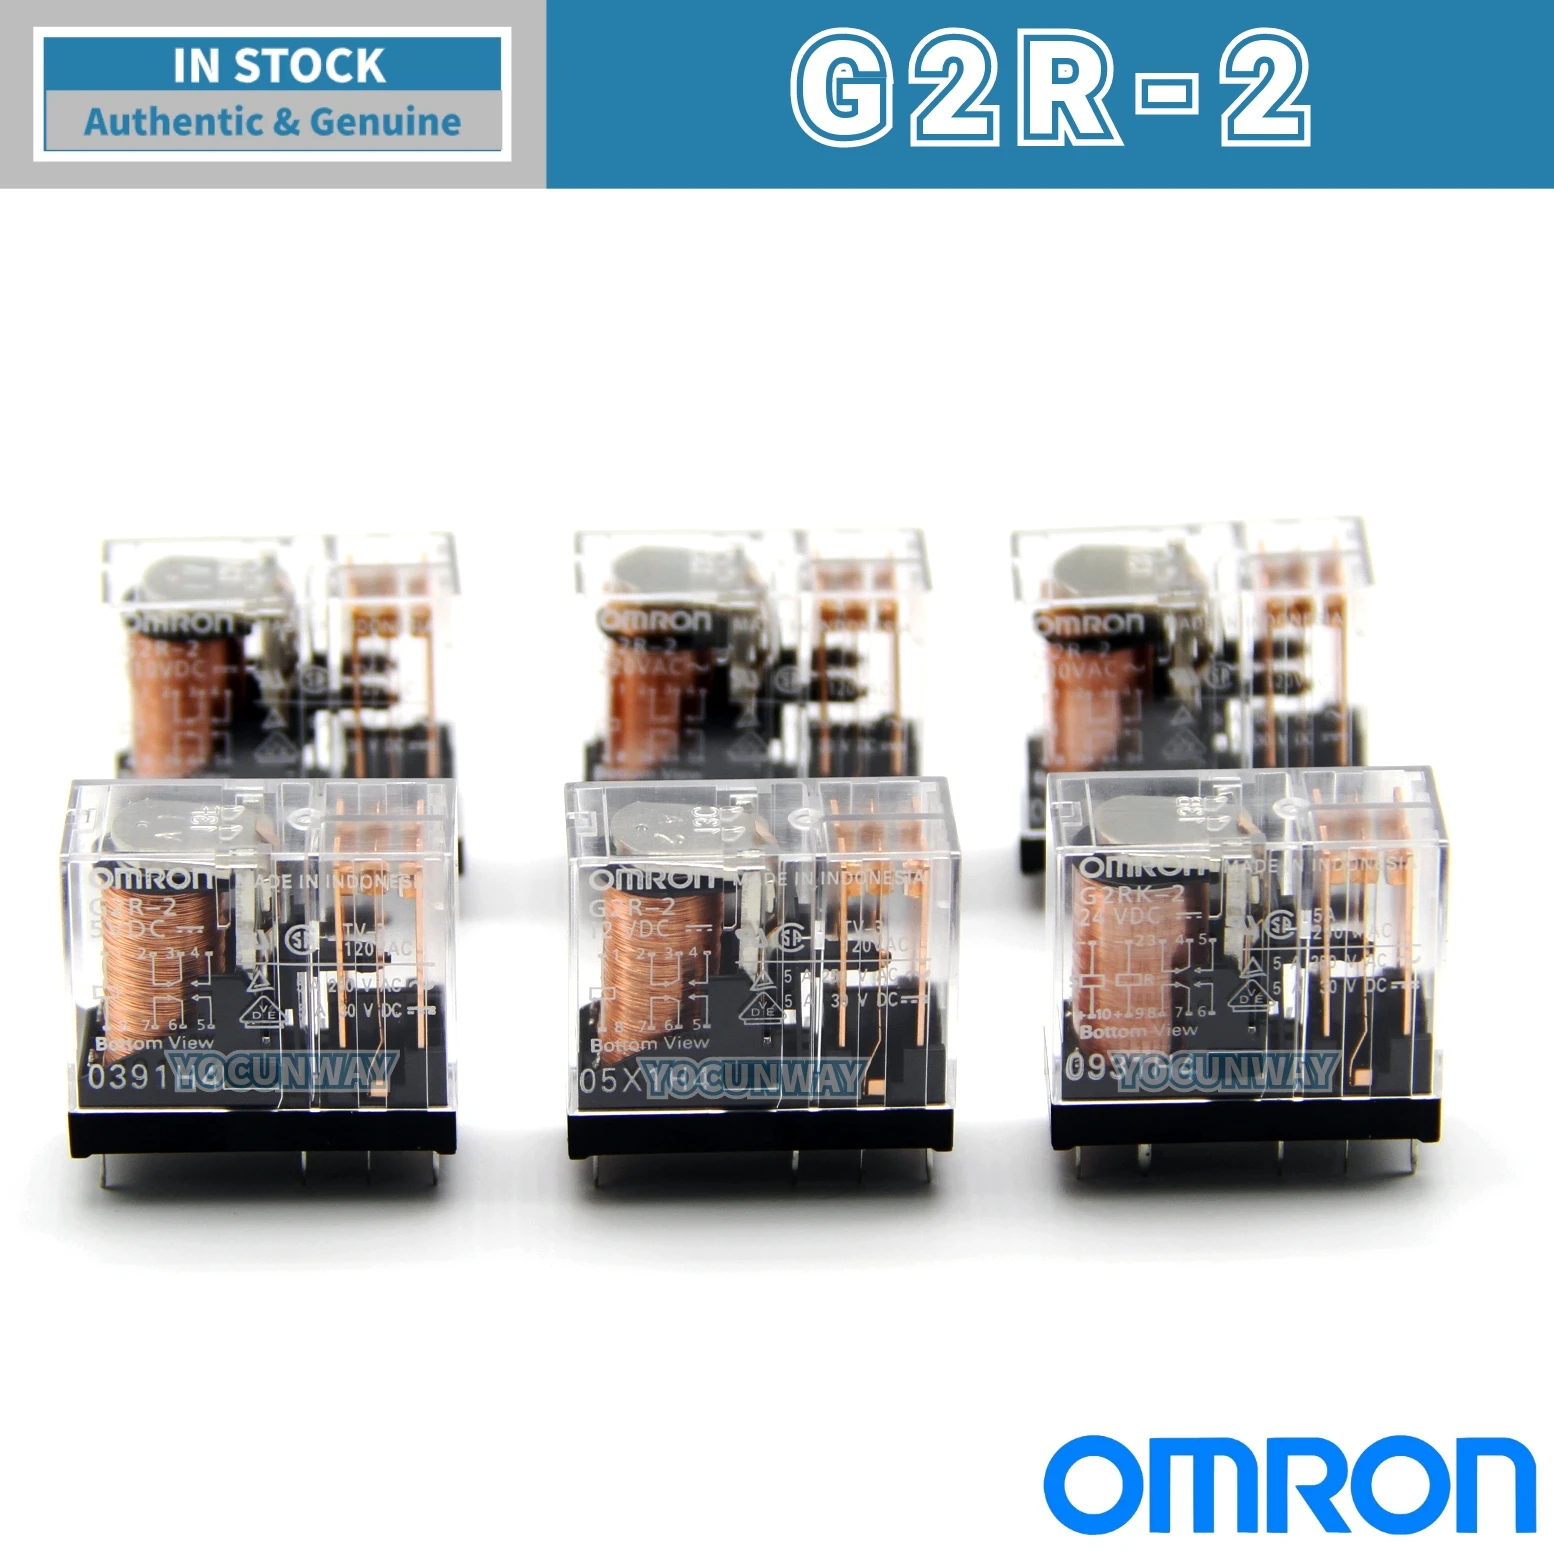 New Authentic Original Japan OMRON PCB Power Relay G2R-2 G2RK 5VDC 12VDC 24VDC 110VAC 220VAC 230VAC DC5V 8 PIN 5A